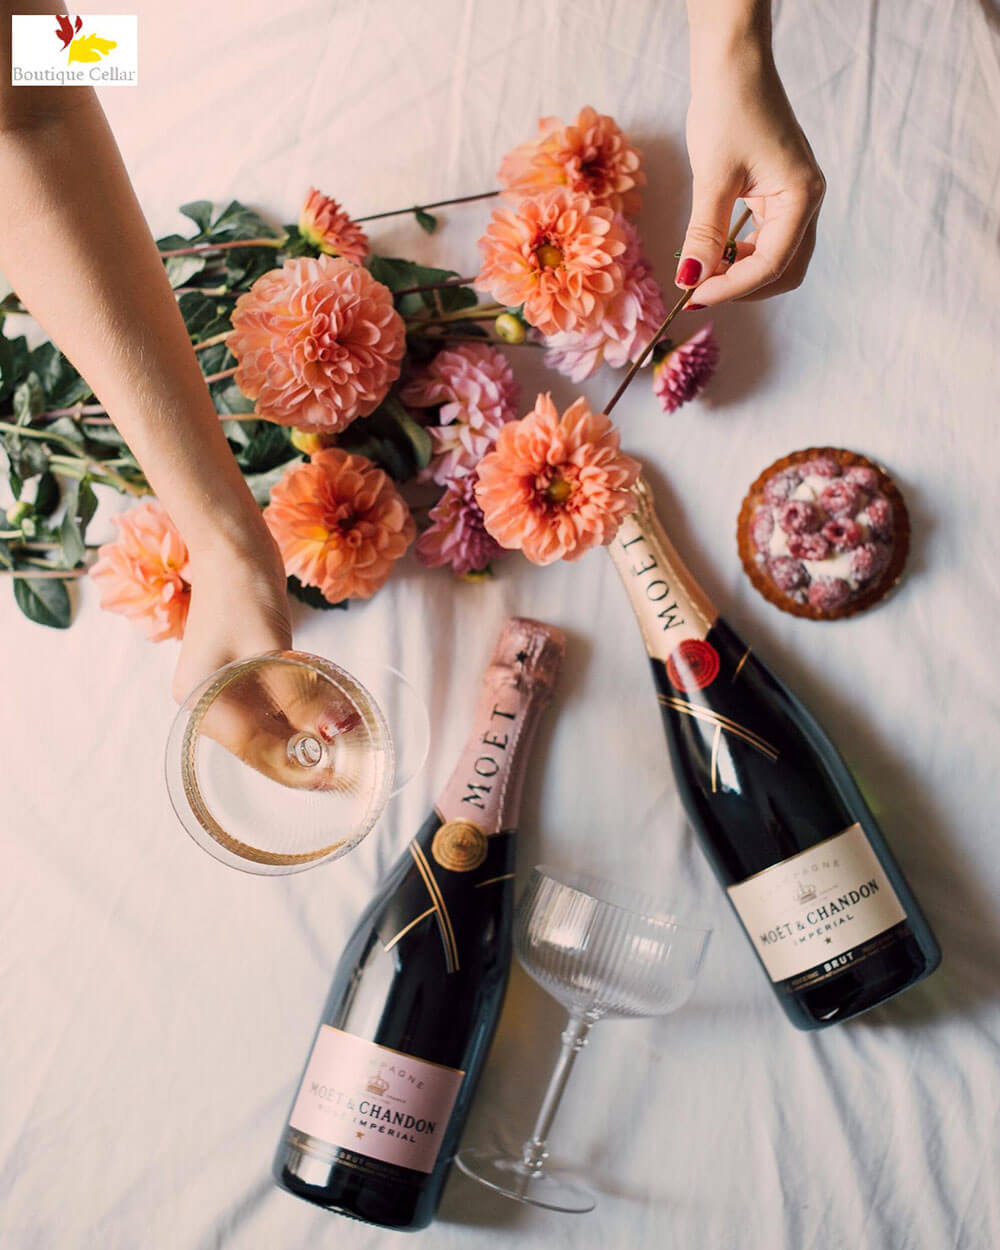 Champagne Moet & Chandon Rose Imperial